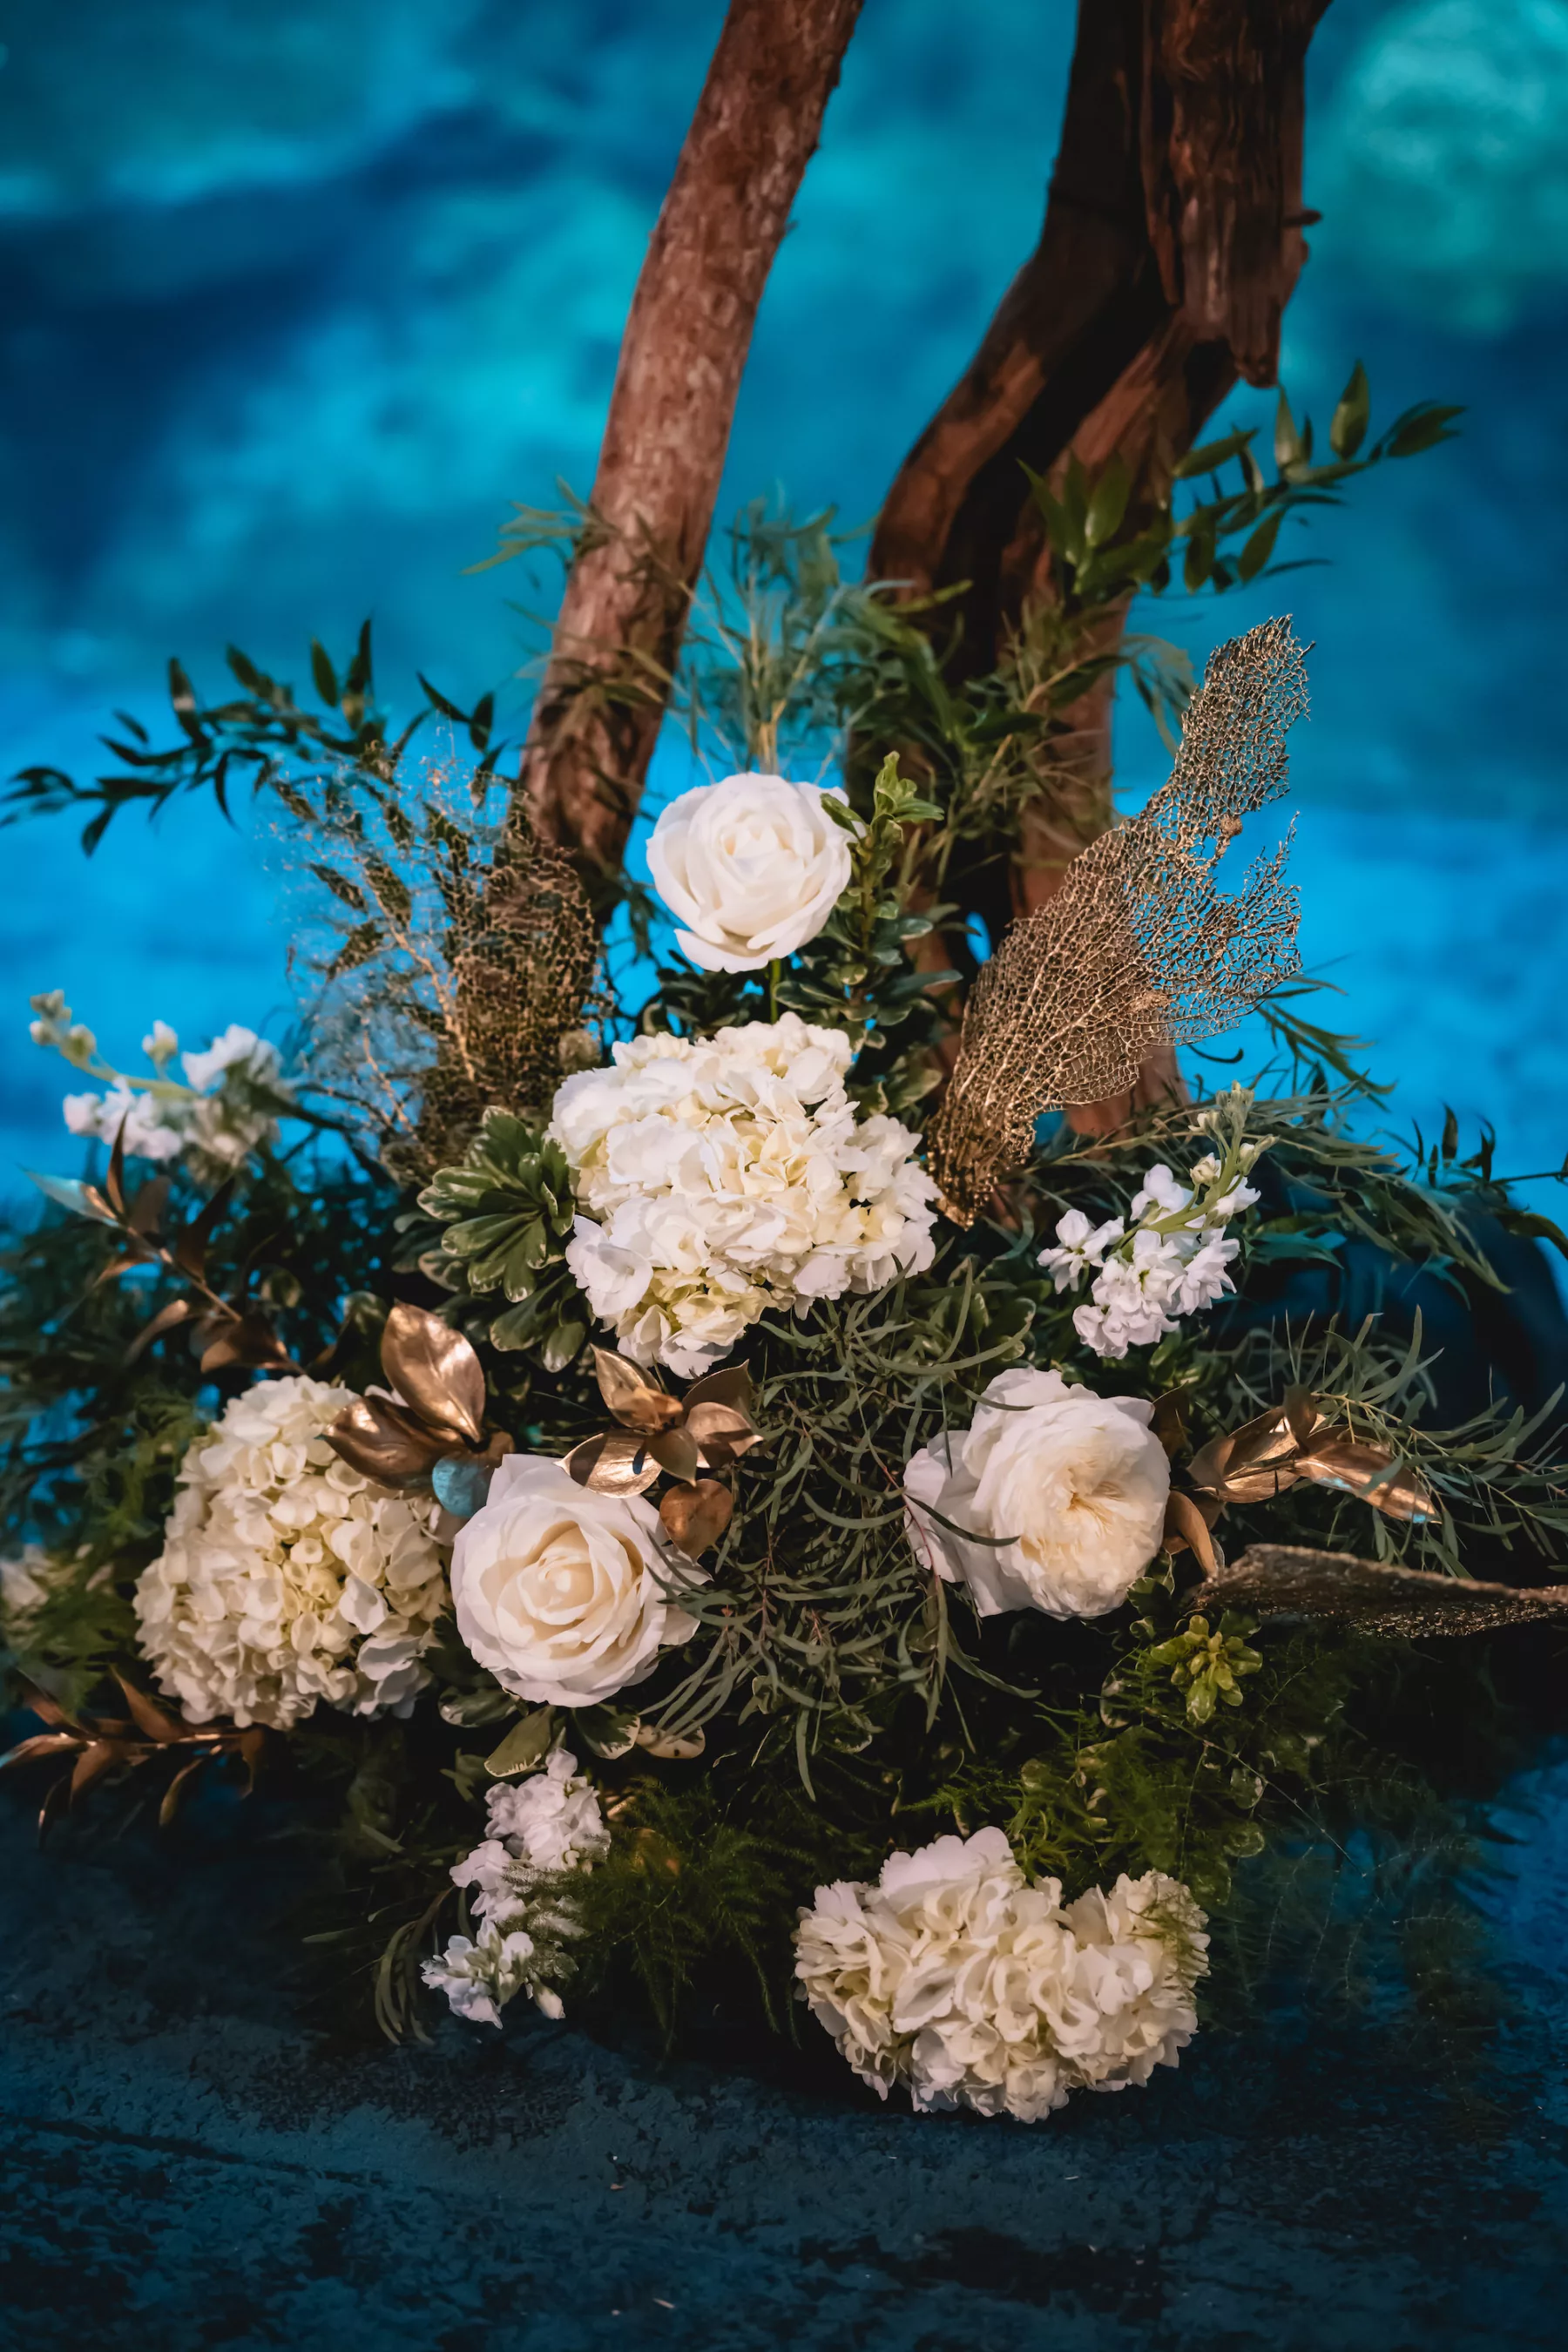 White Hydrangeas, Roses, Greenery, and Gold Coral Wedding Ceremony Driftwood Arch Floral Arrangement Ideas | Tampa Bay Florist Lemon Drops